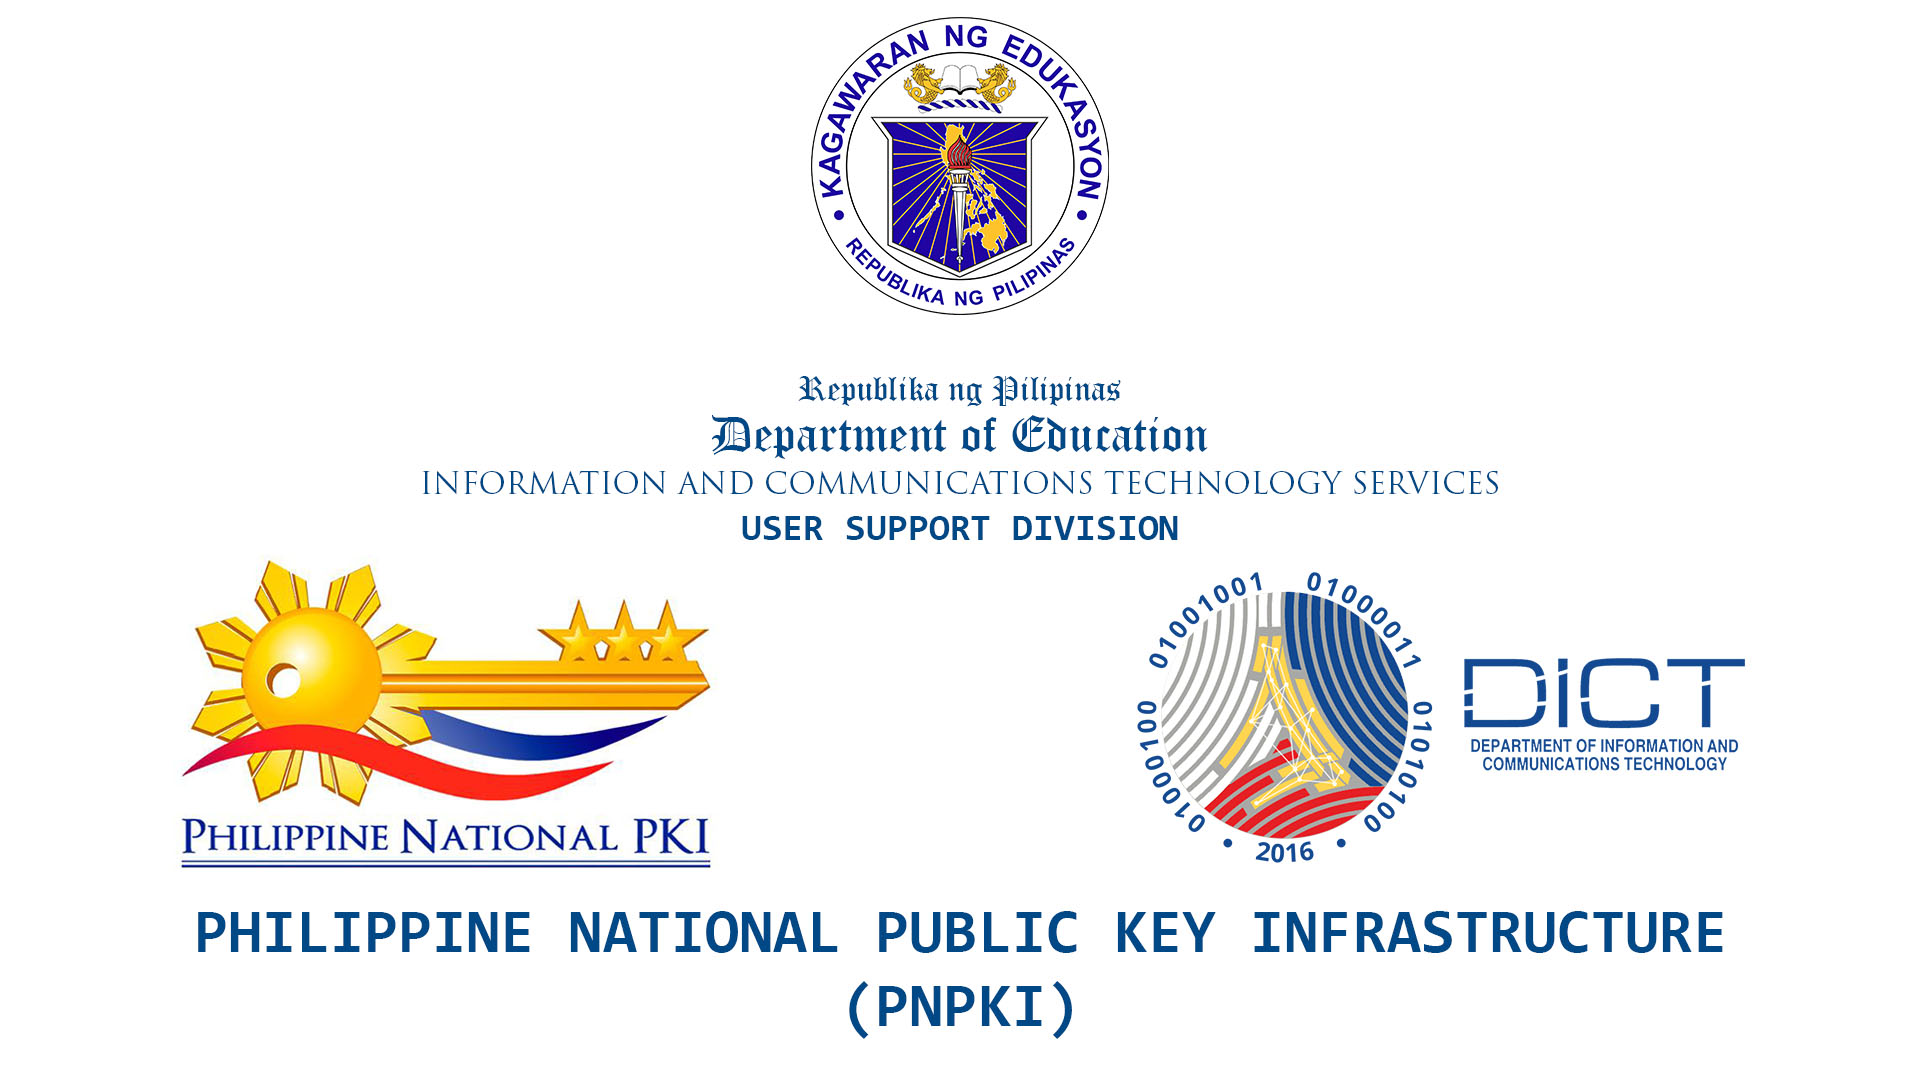 Iloilo 4th Congressional District - Facility for the Submission of the Application Requirement for the PNPKI Digital Certificate of DepEd Personnel in the Field Offices